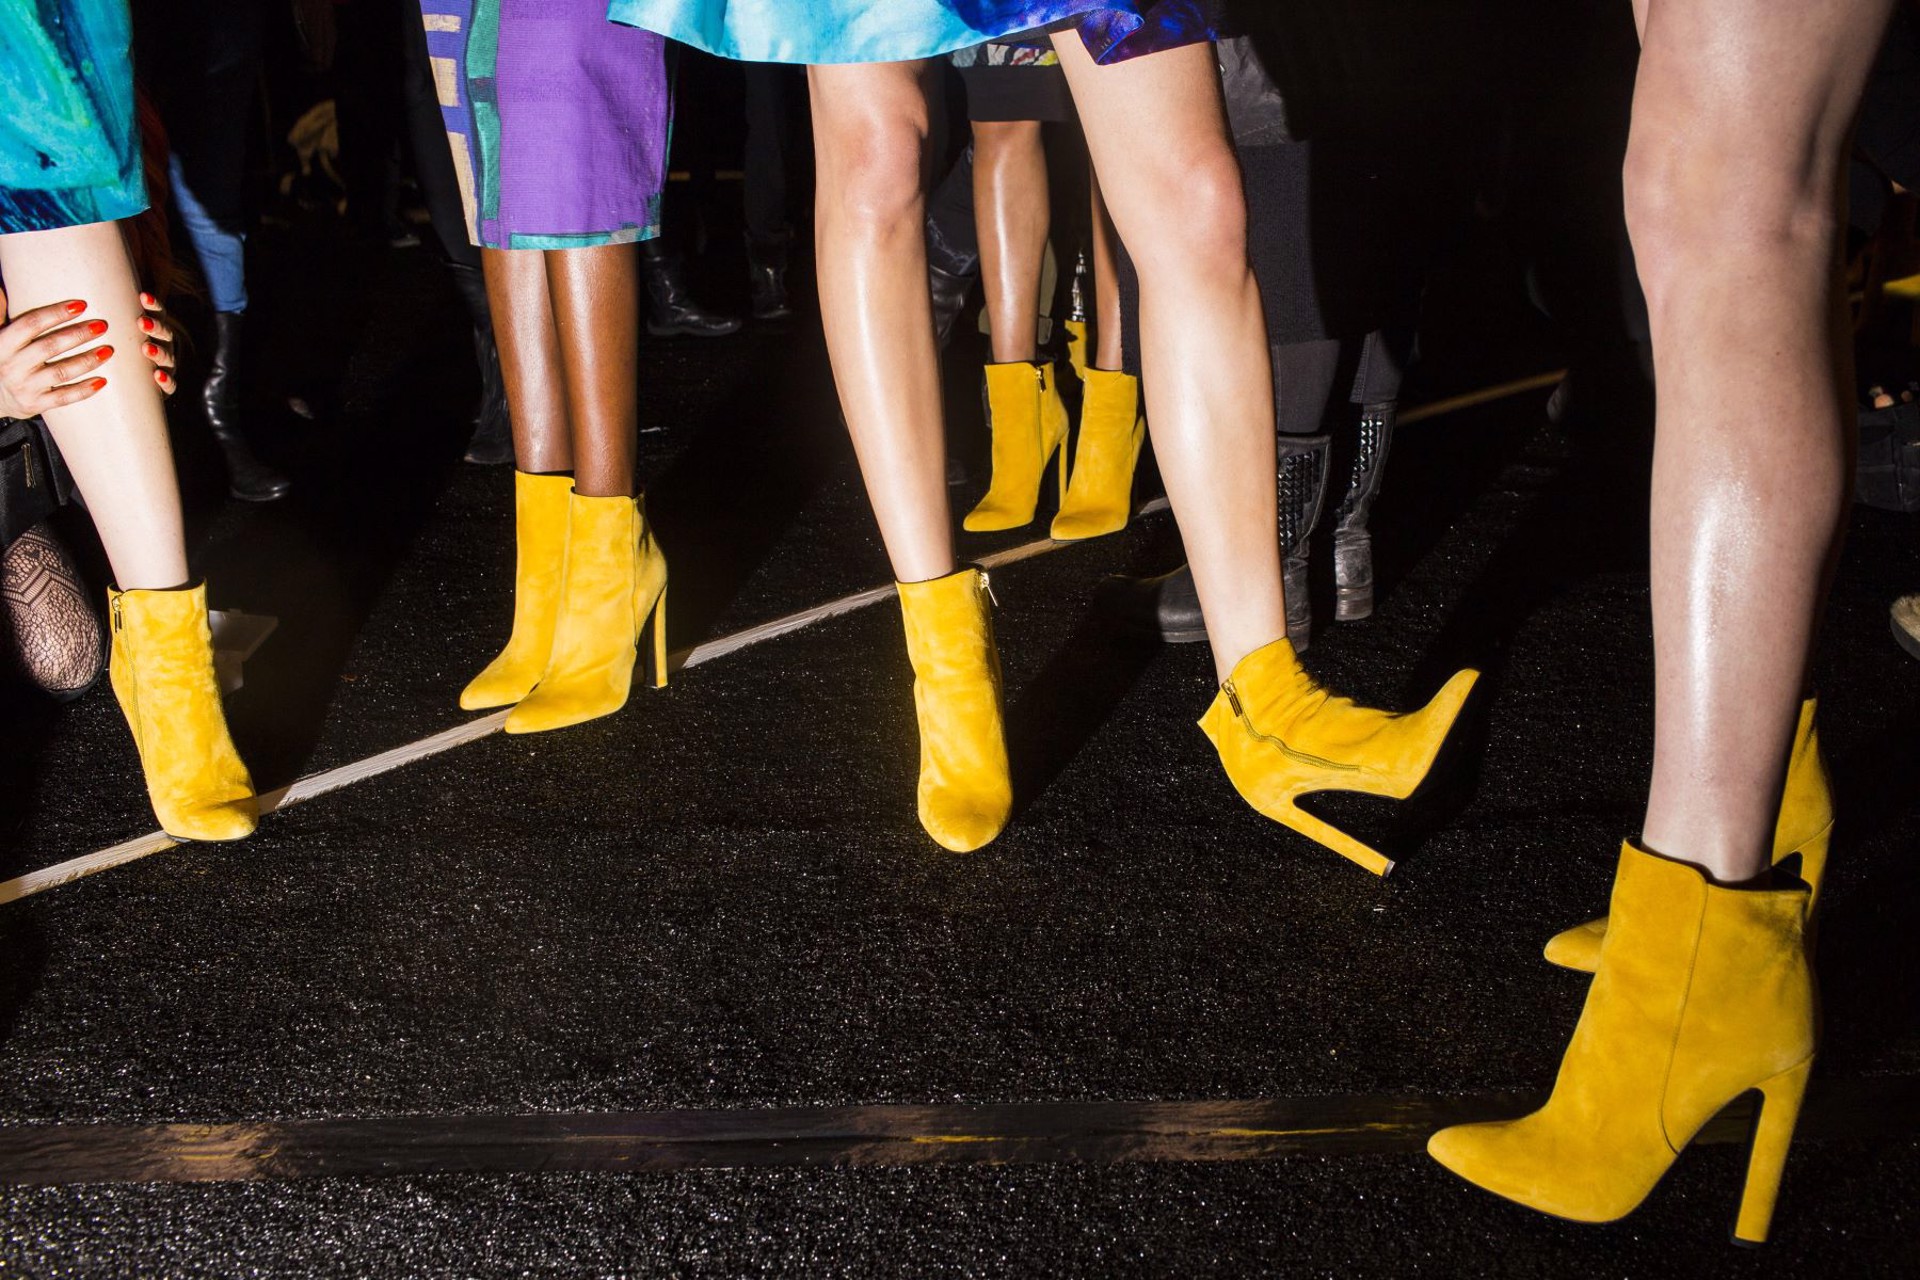 Backstage at Desigual with Yellow Boots, Out of Fashion series, NYC by Landon Nordeman